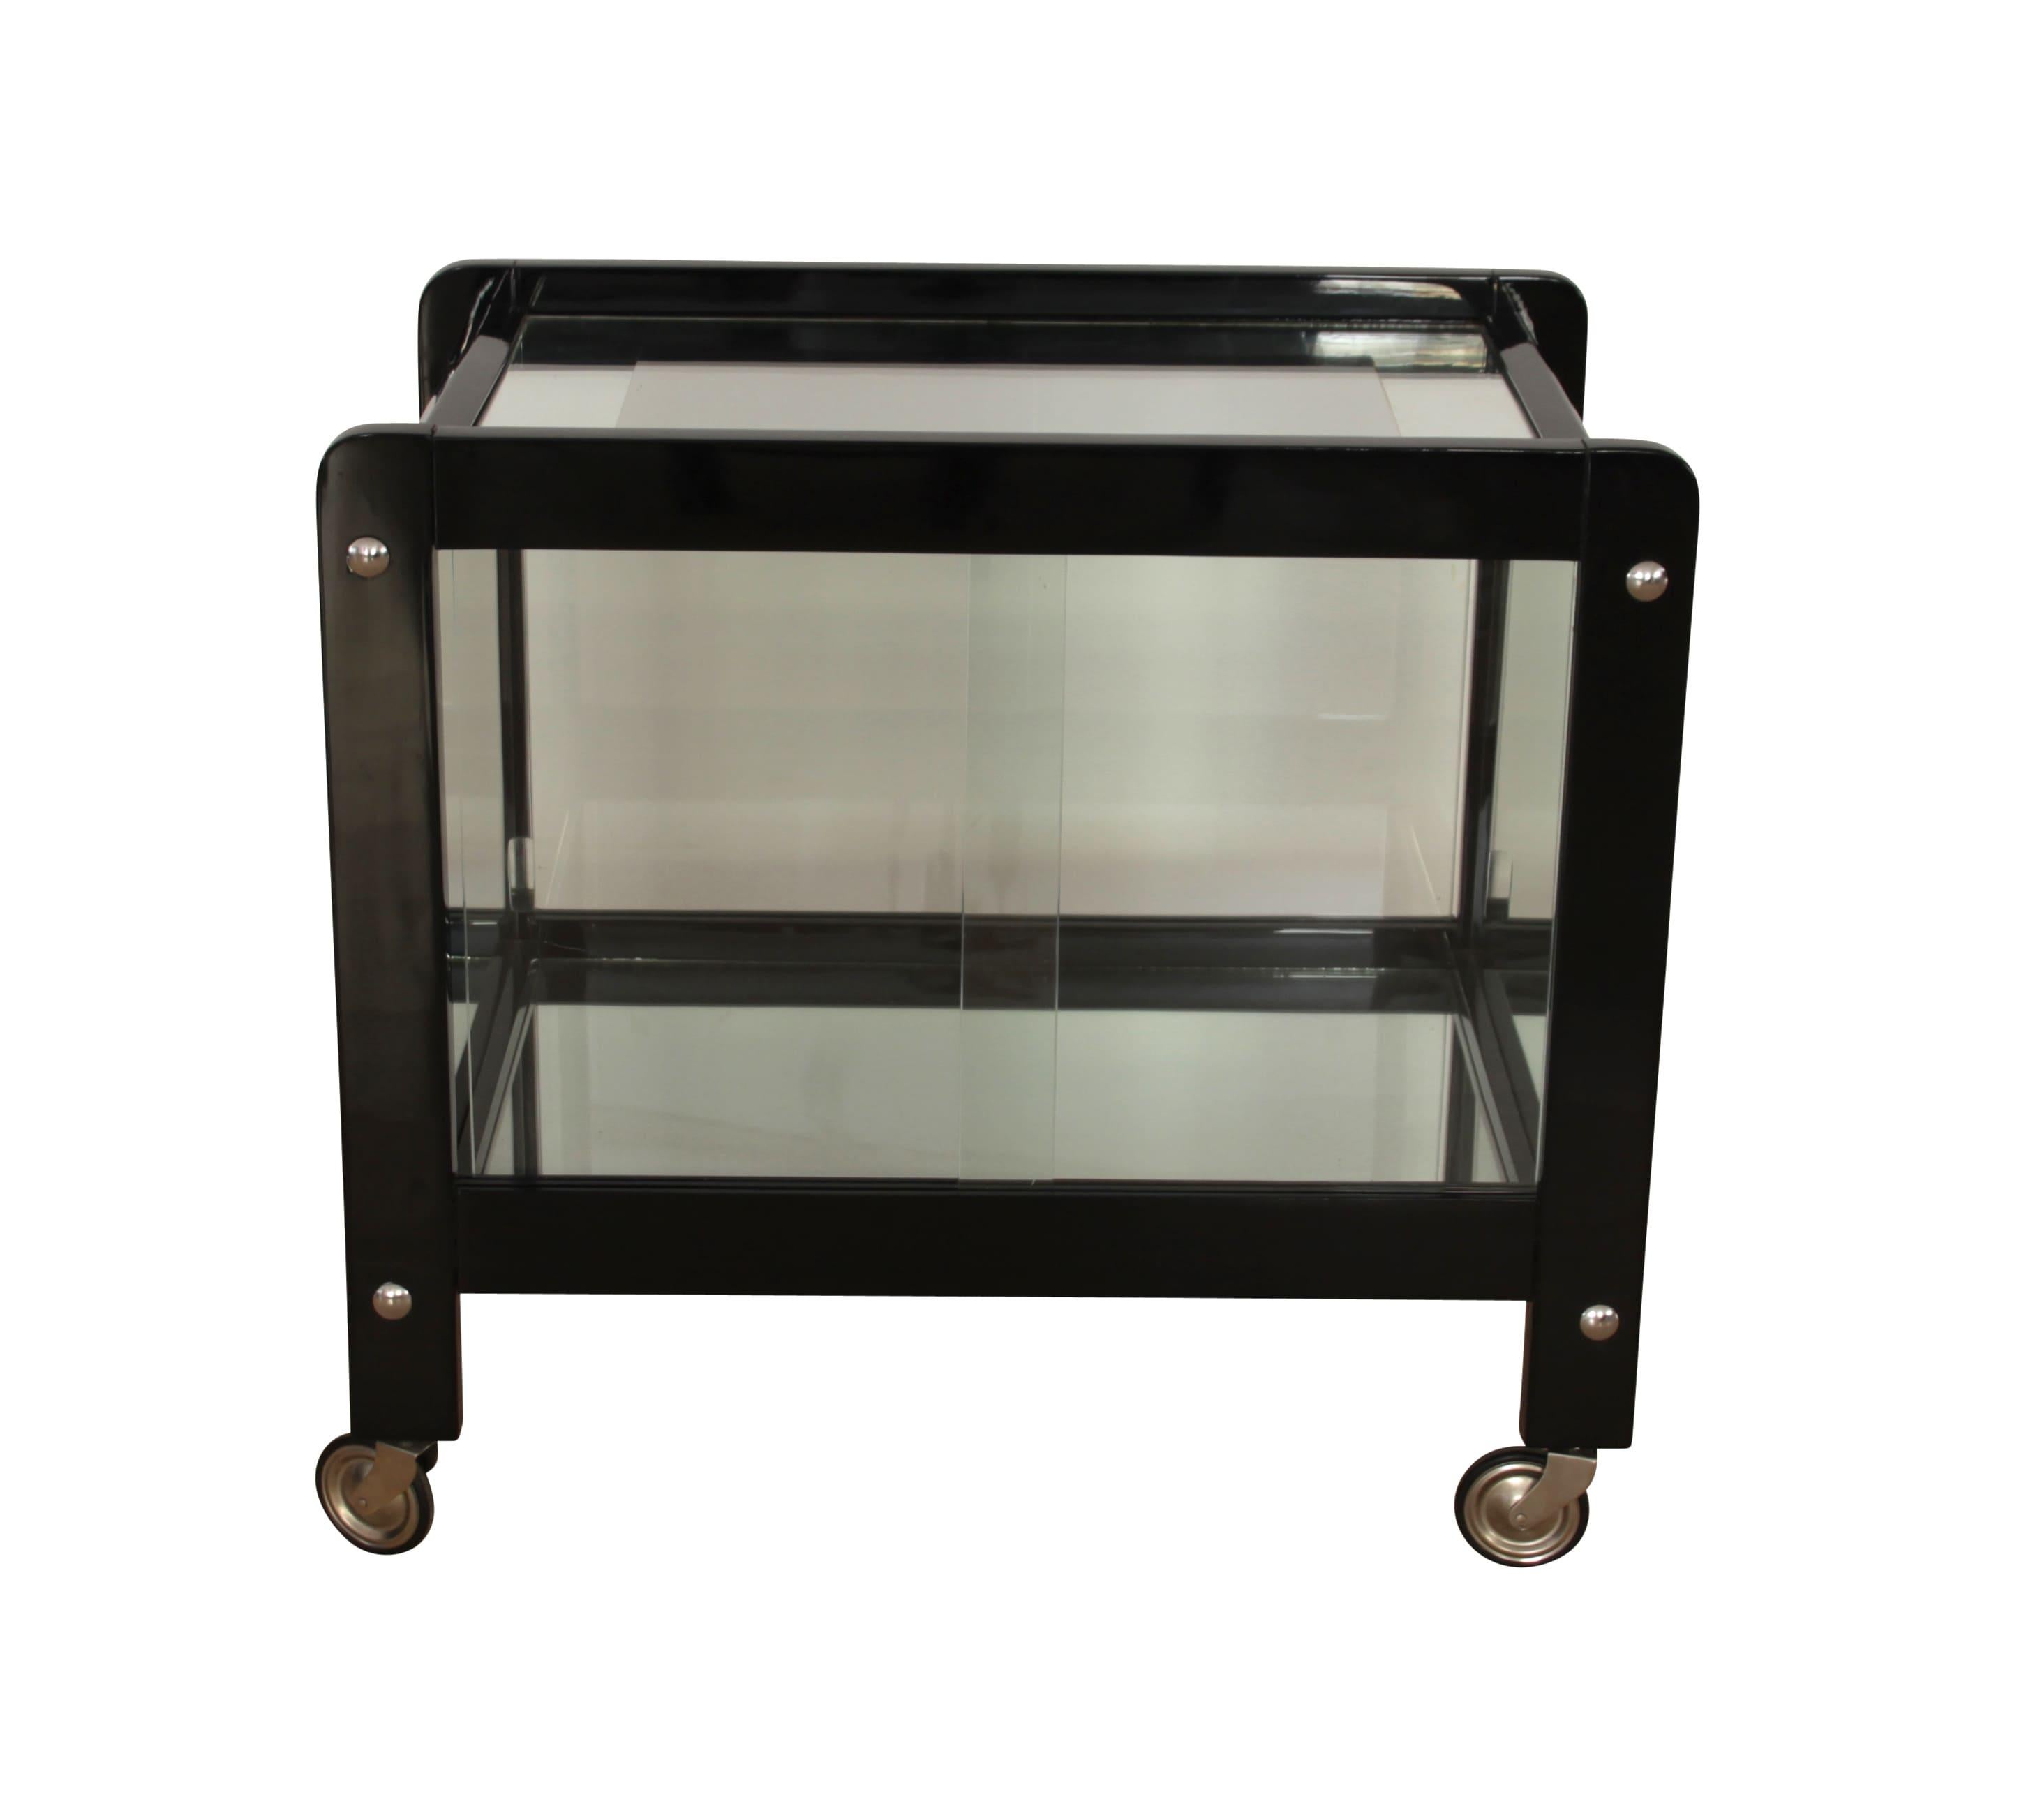 Elegant Art Deco serving table in black lacquered wood, chromed metal, glass and mirror, from France, circa 1930.
Black high-gloss lacquer on wood. Chromed metal hardware. Original old glass plate with silver-colored framing on the top plate.
Two